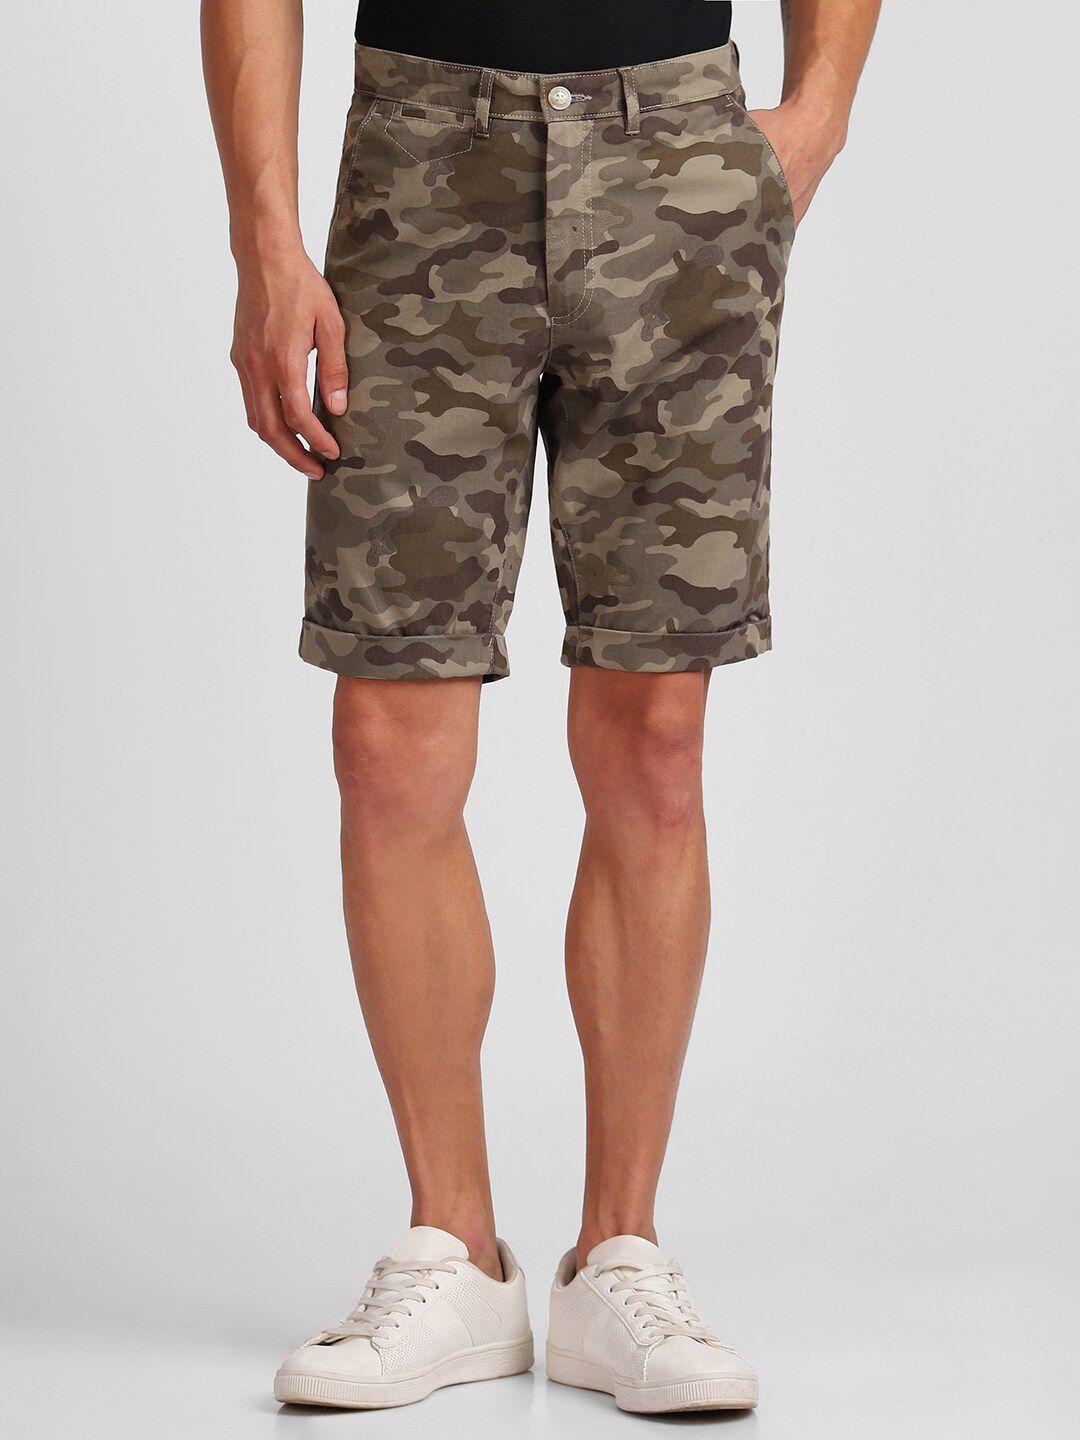 allen-solly-men-camouflage-printed-slim-fit-pure-cotton-shorts